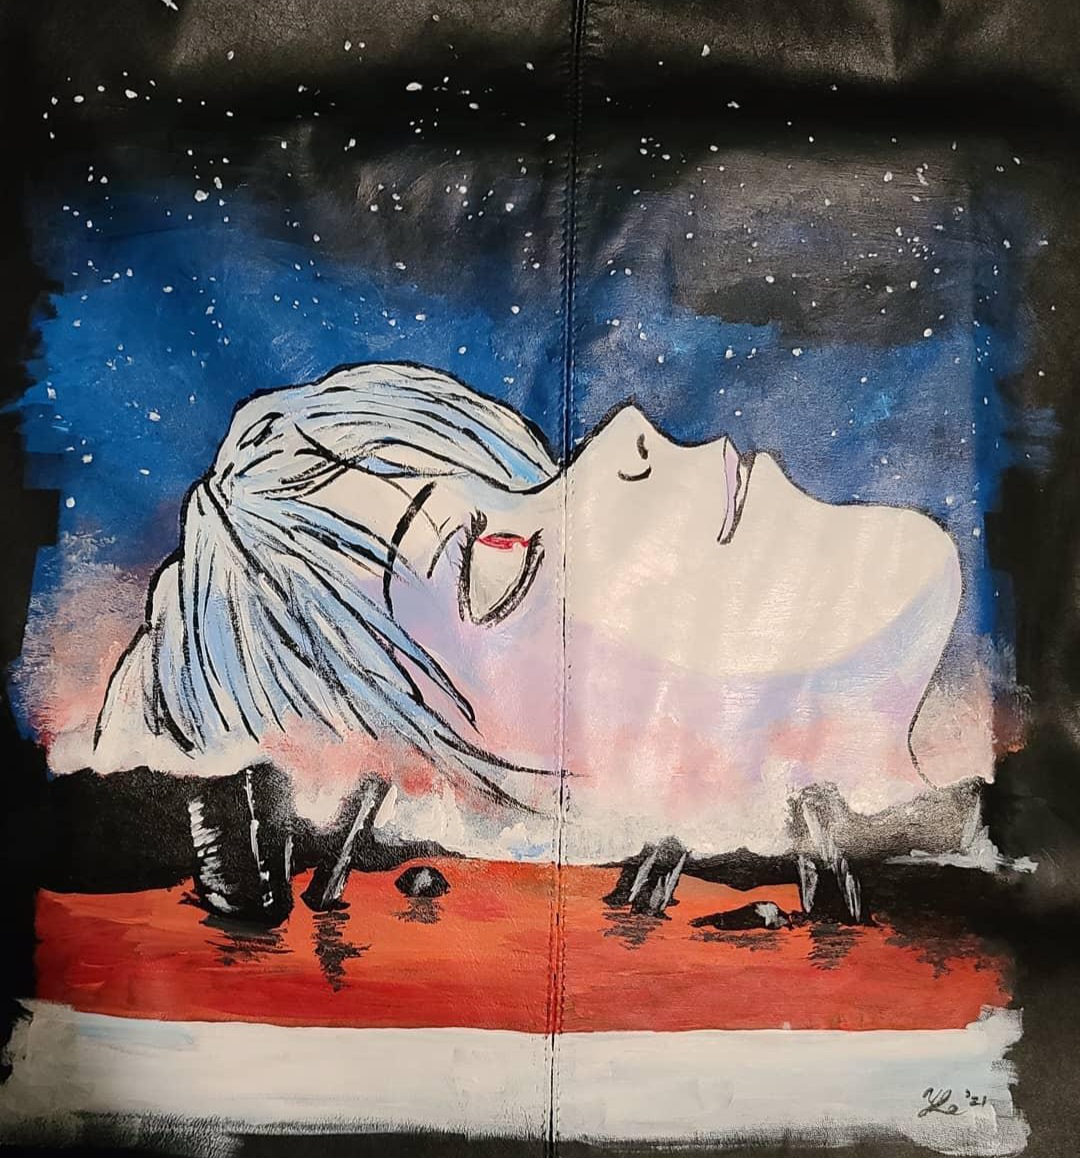 Close up of a black leather jacket with a hand-painted image of a side profile anime bust with white skin, red eyes, and icy blue hair. The person is looking up at a starry sky while red water sits below